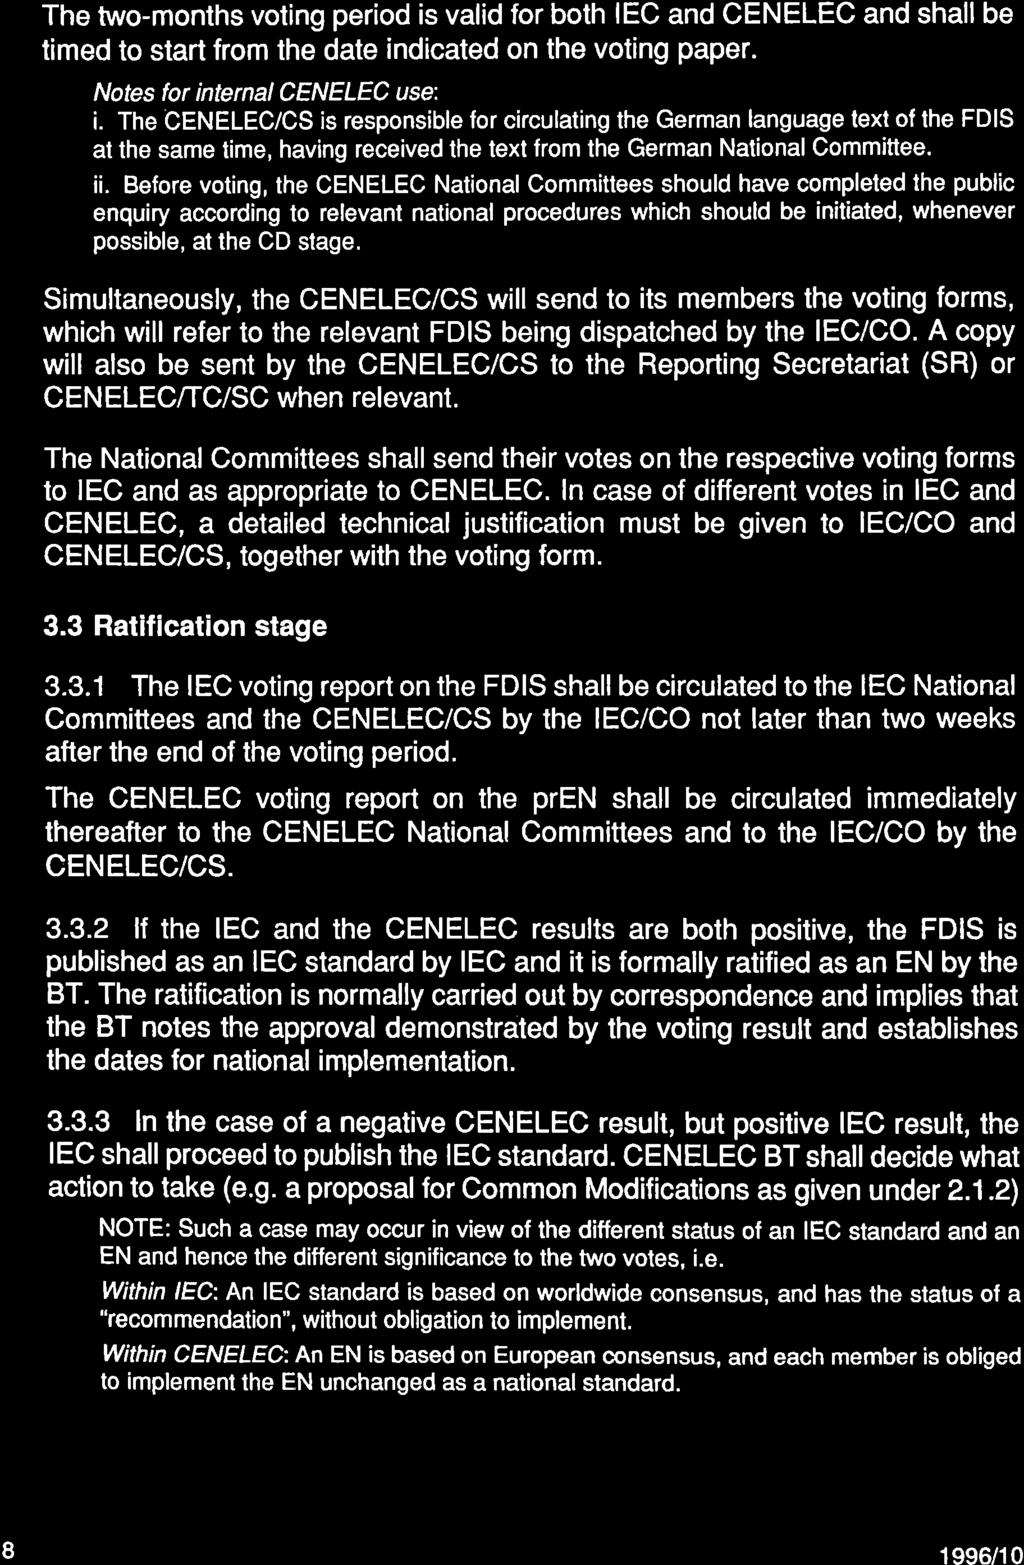 The two-months voting period is valid for both IEC and CENELEC and shall be timed to start from the date indicated on the voting paper. Nofes for internalcenelec use: i.